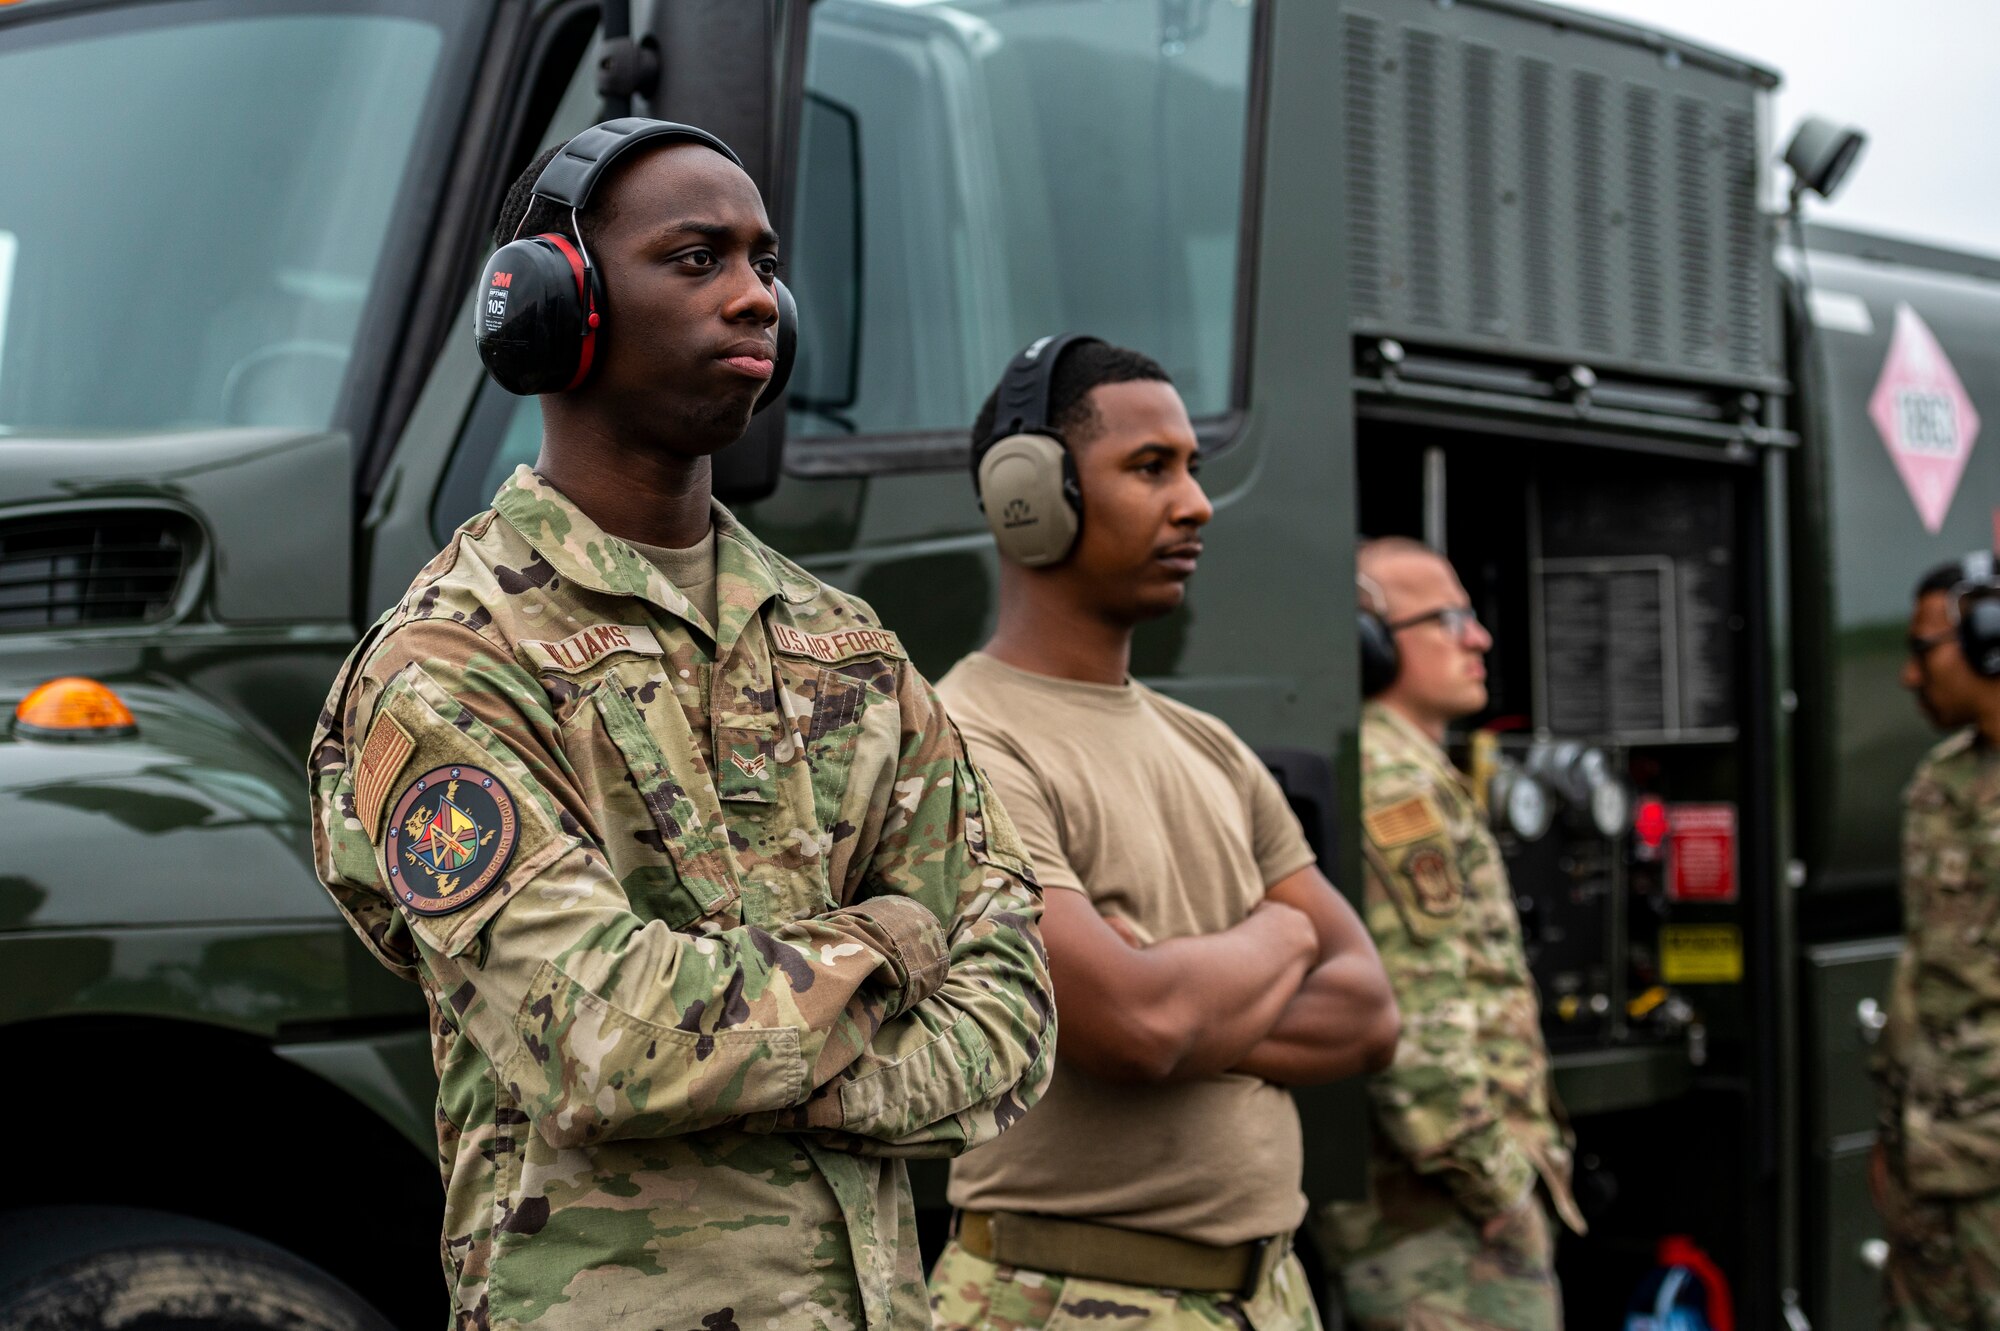 The purpose of this exercise was to train multi-capable Airmen to quickly deploy and operate at an austere location with minimal personnel and equipment